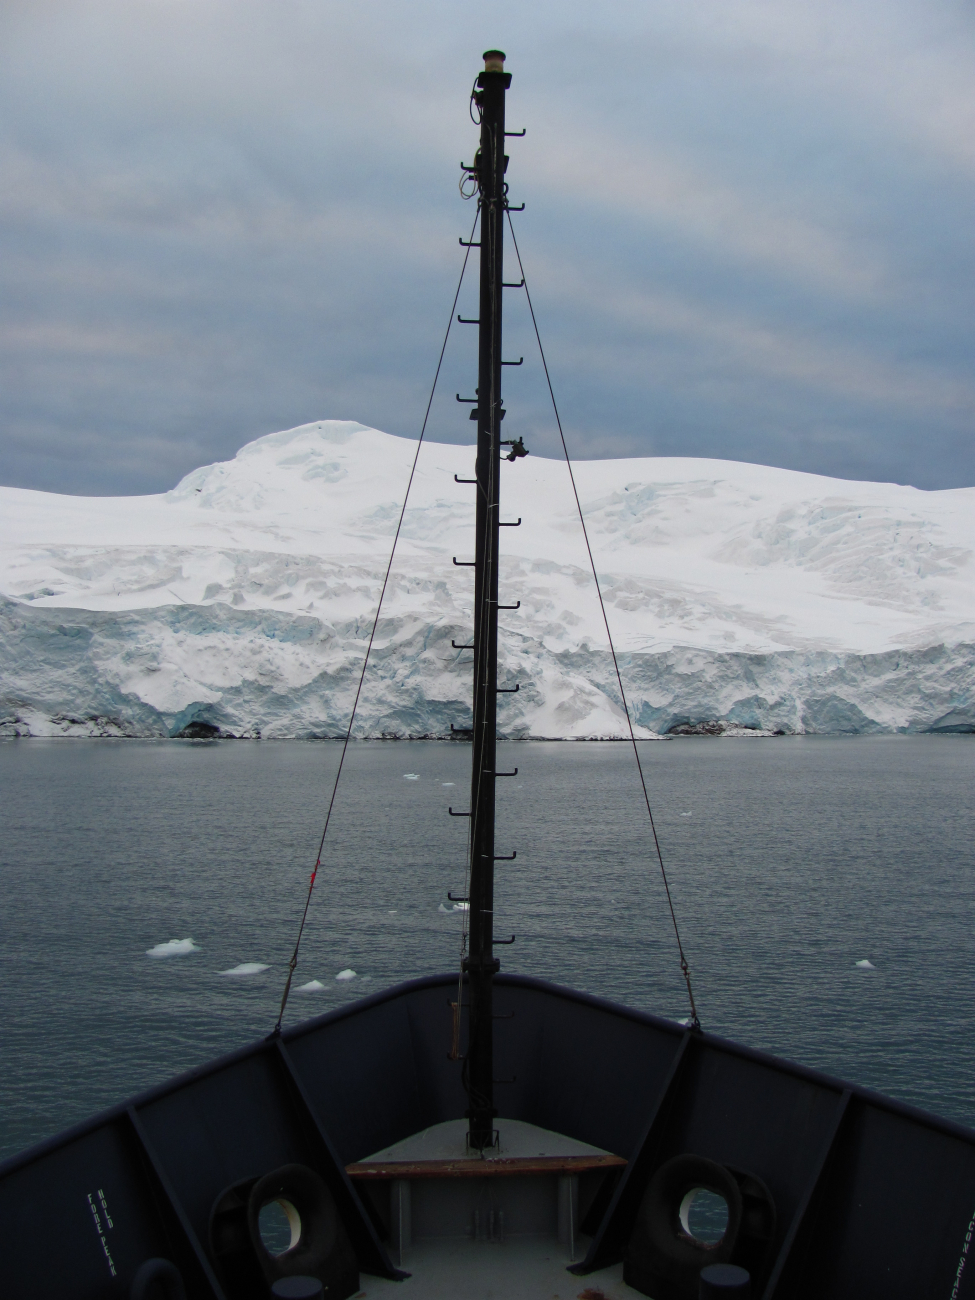 A view from the bow of the R/V Moana Wave provides spectacular Antarcticglaciers and calm seas, a rare occurence in the Southern Ocean